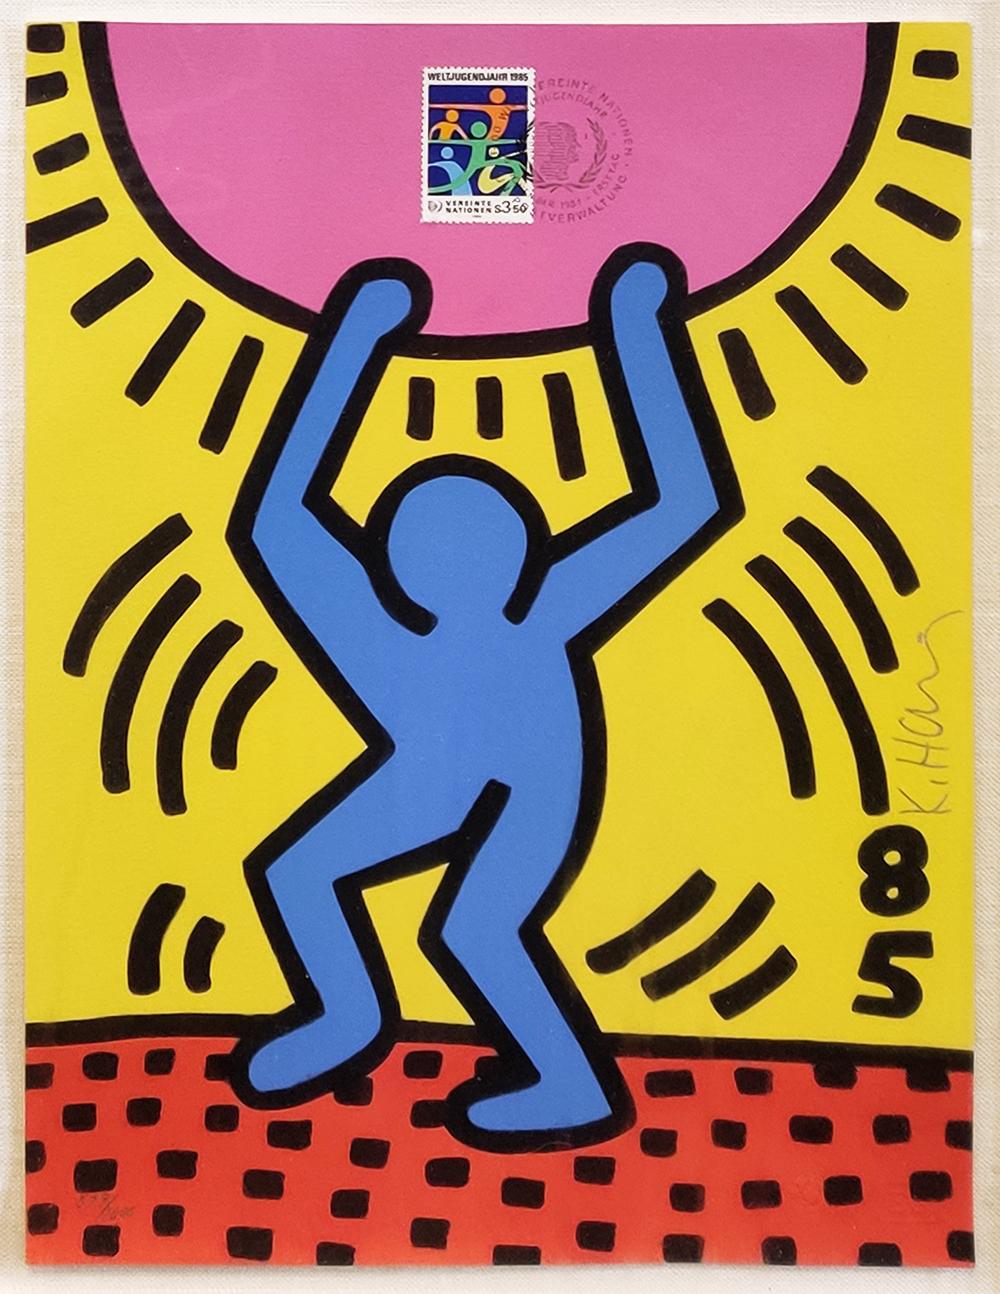 INTERNATIONAL YOUTH YEAR - Print by Keith Haring